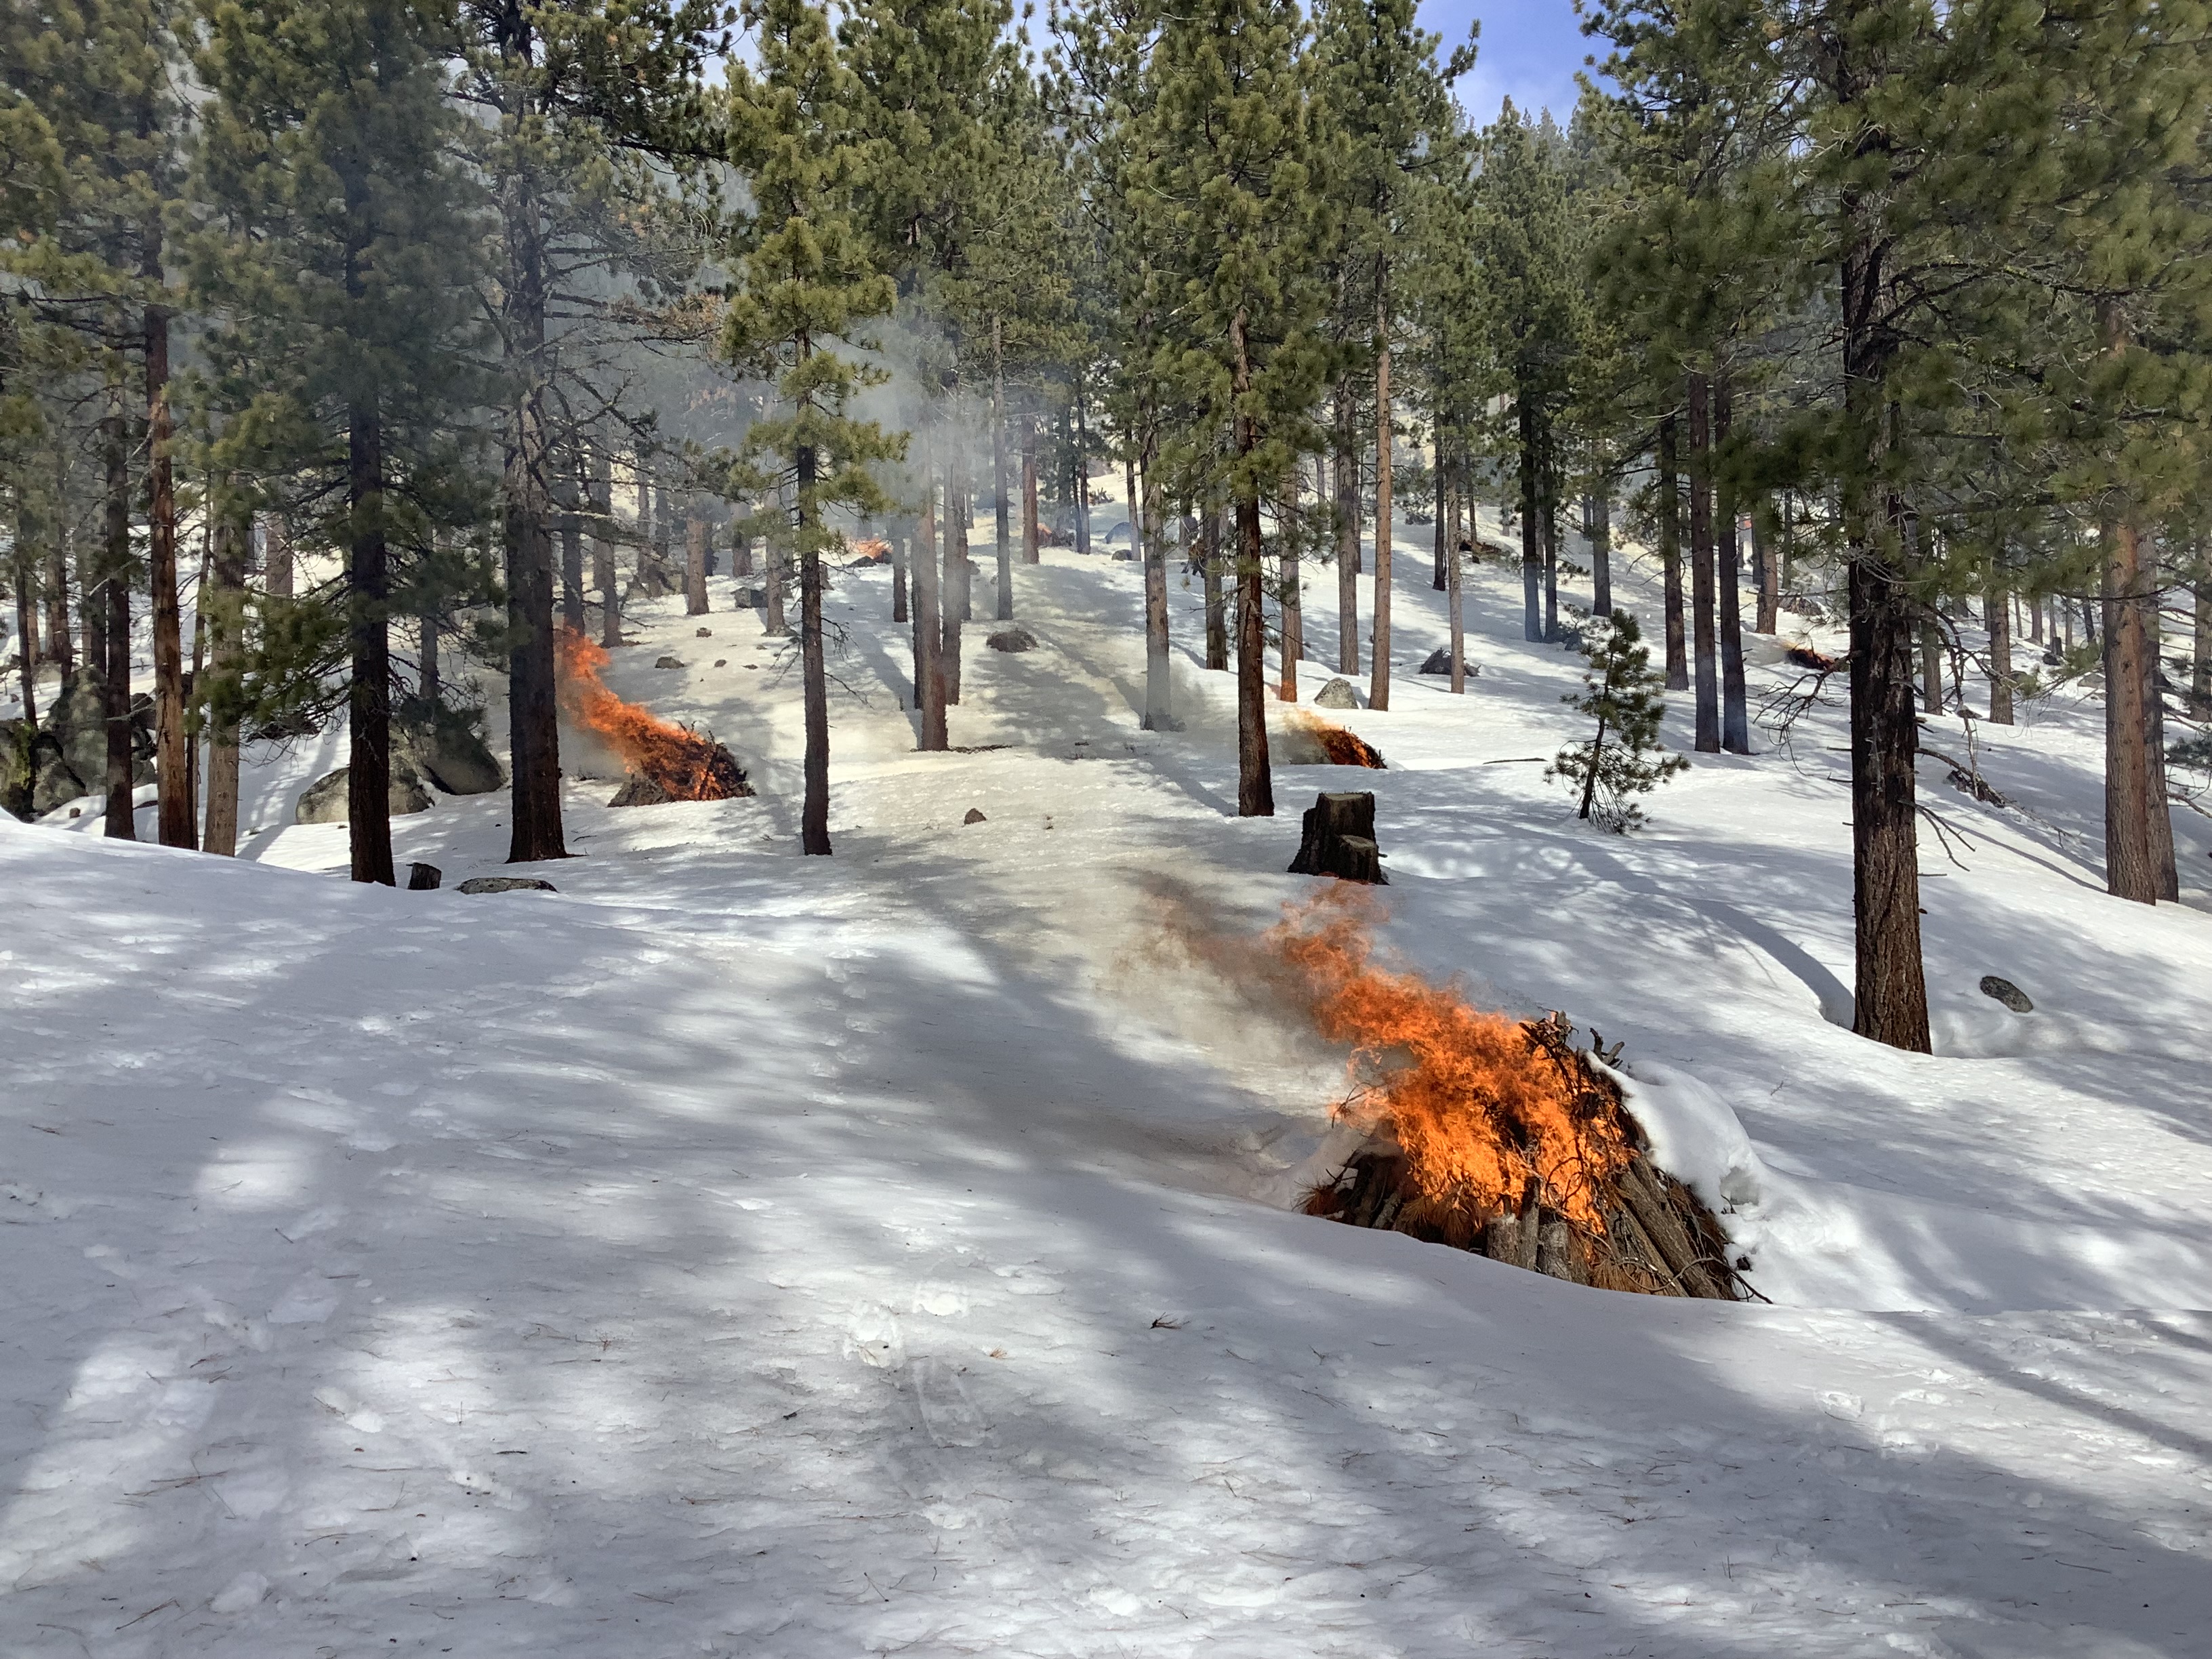 Pile burning at Lake Tahoe Nevada State Park. Three actively burning piles visible, surrounded by snow